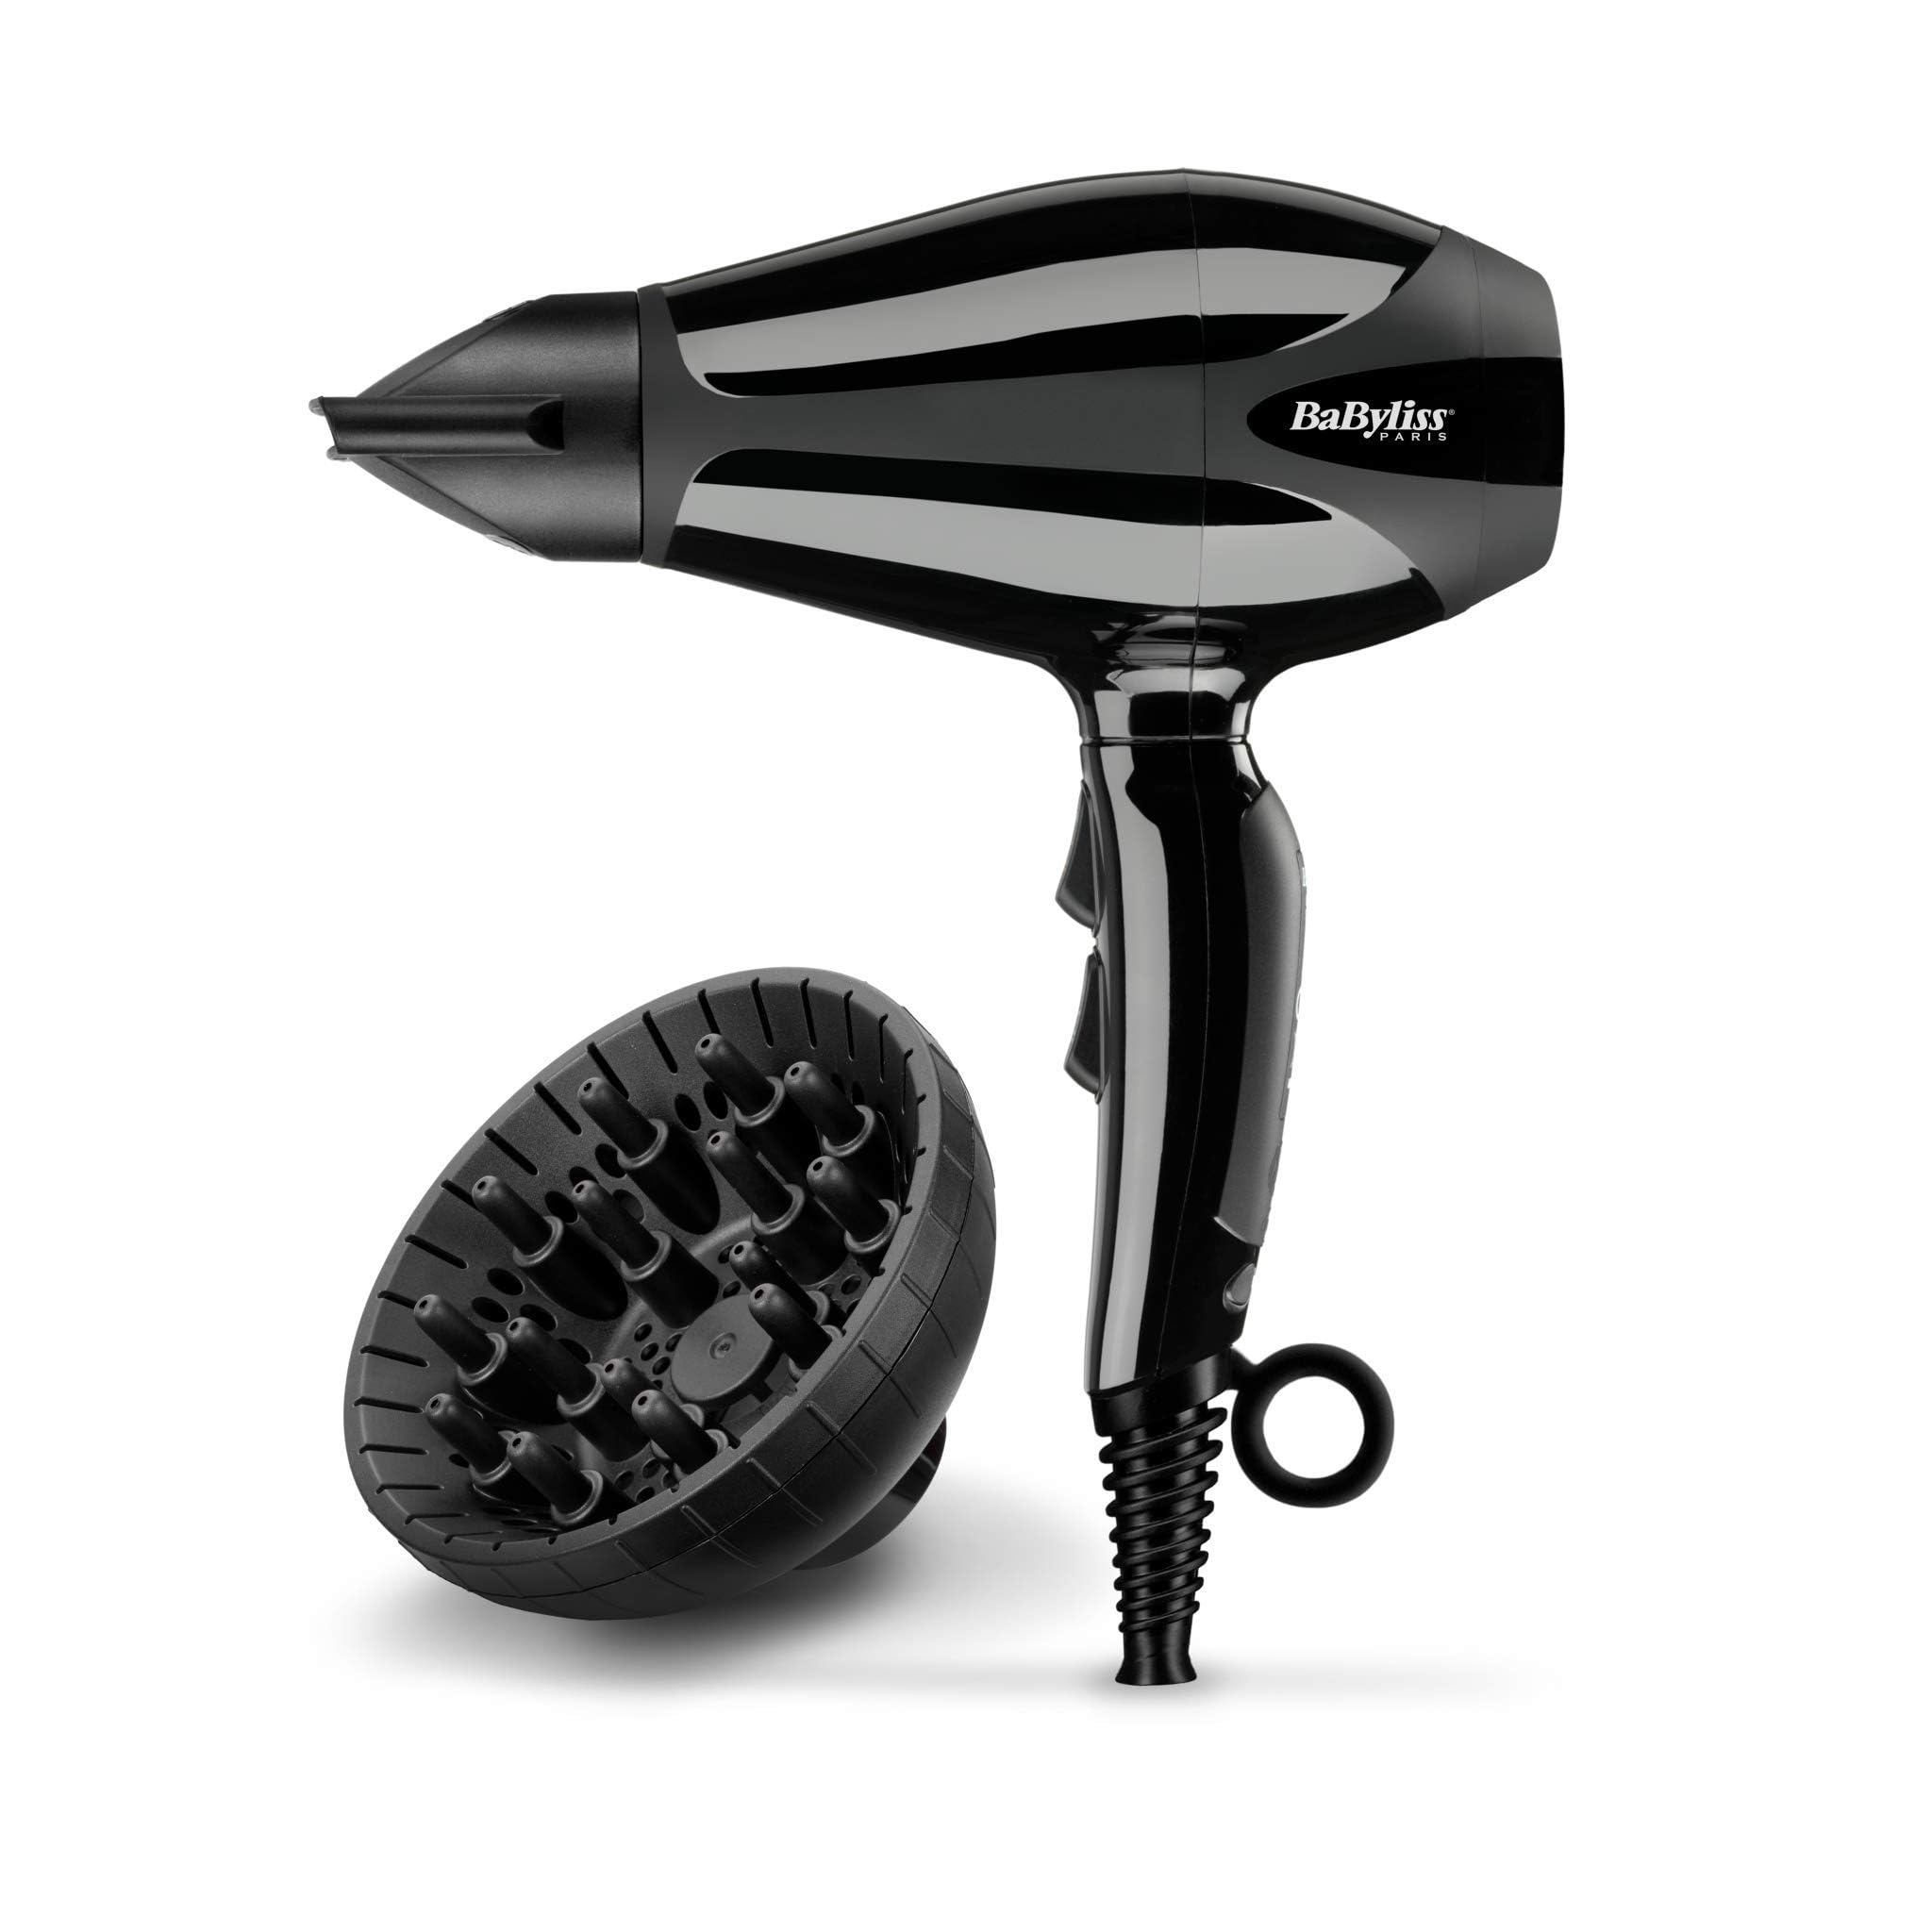 BaByliss Compact Pro 2400 Hair Dryer AC, Italian Made For Quality & Long-lasting Performance, Ultra-slim Nozzle With Ionic Frizz Control Technology, Portable Dryer With Diffuser, 6715DSDE (Black)